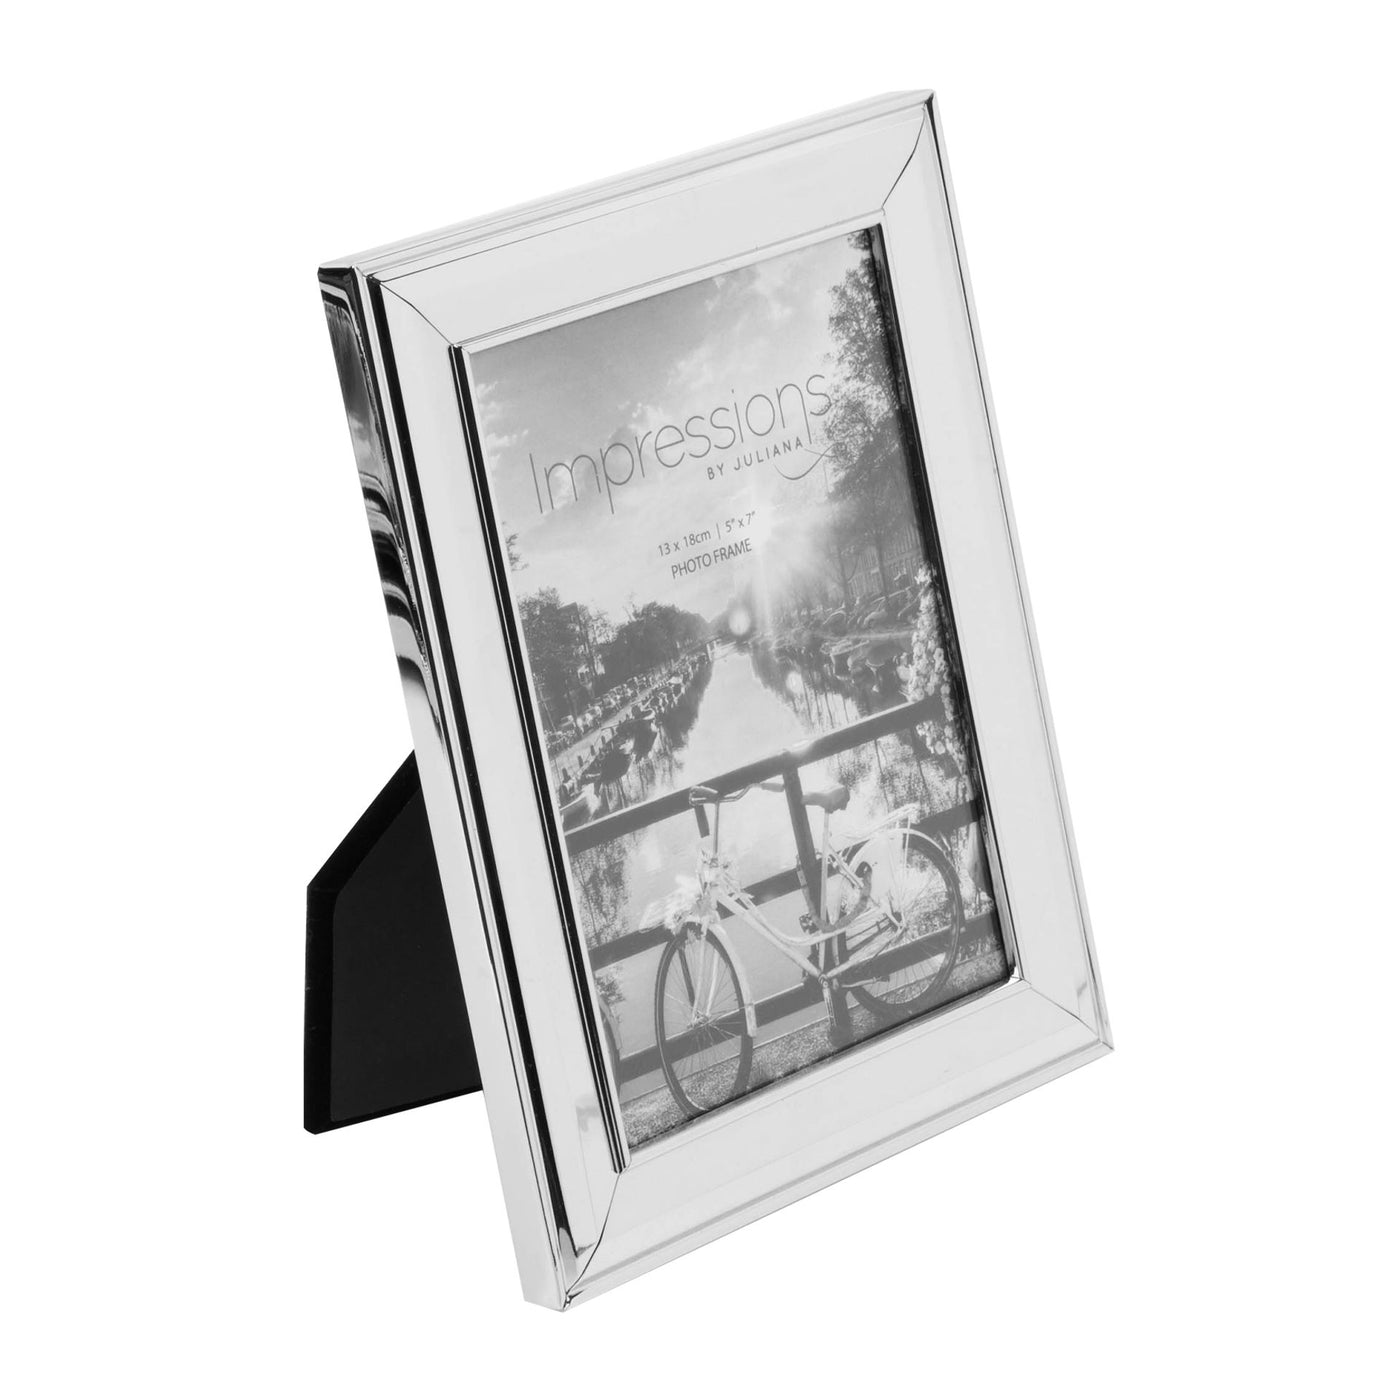 Metal Plated Silver Photo Frame